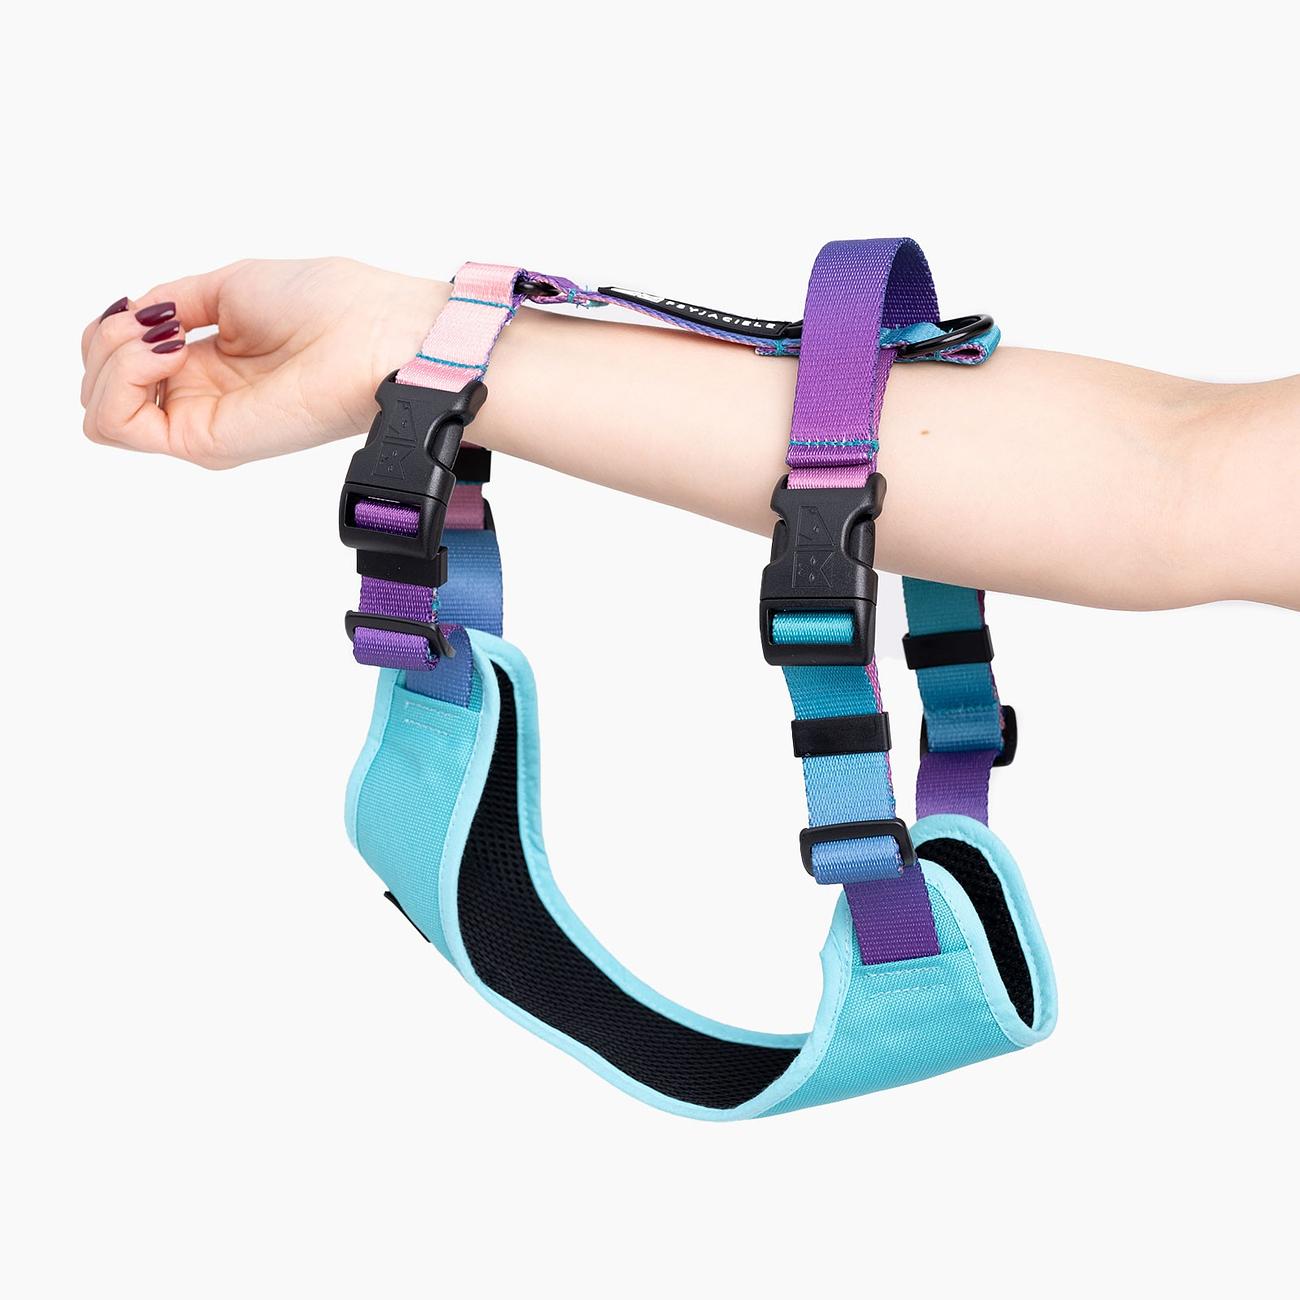 Stay-on pressure-free harness